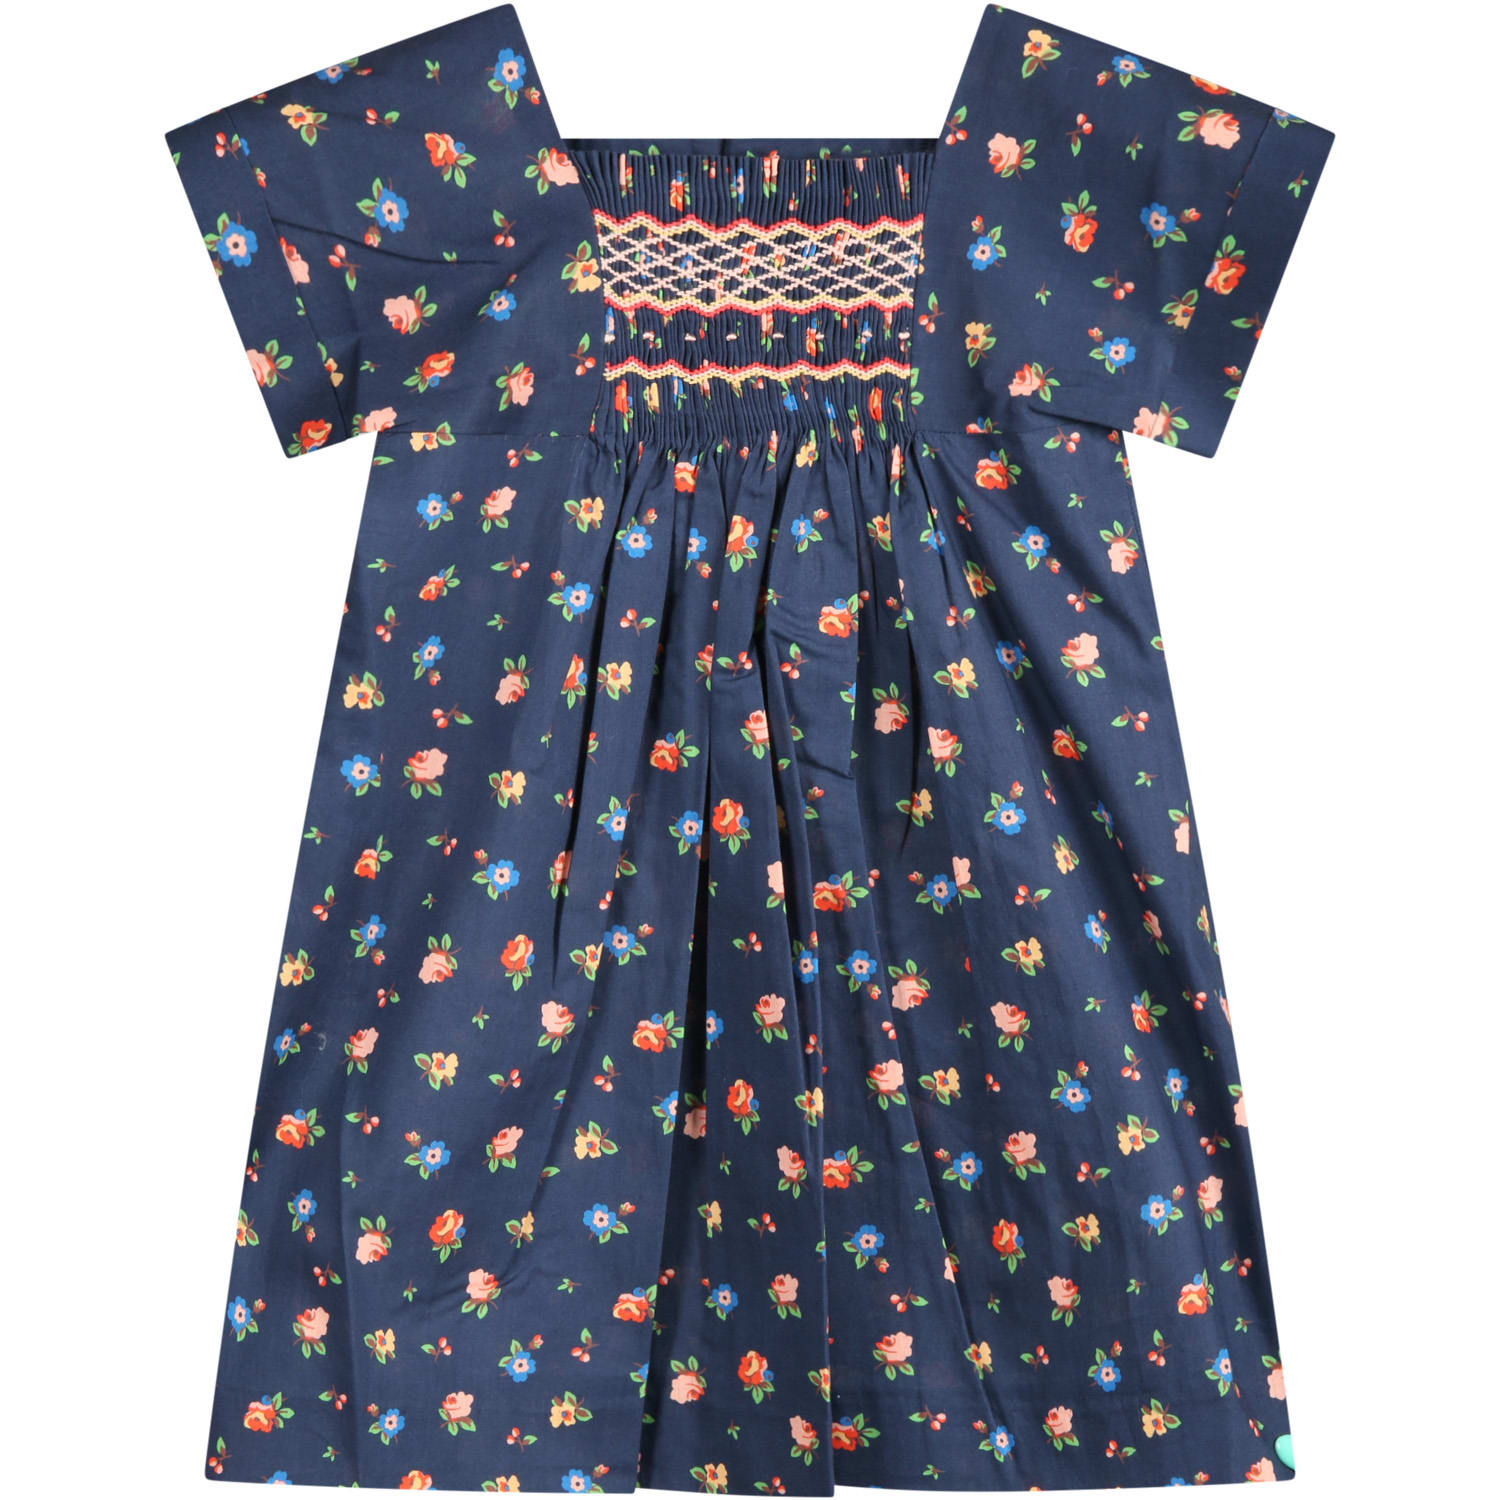 BONPOINT BLUE DRESS FOR BABYGIRL WITH FLOWERS,S01XDRWO0401 570